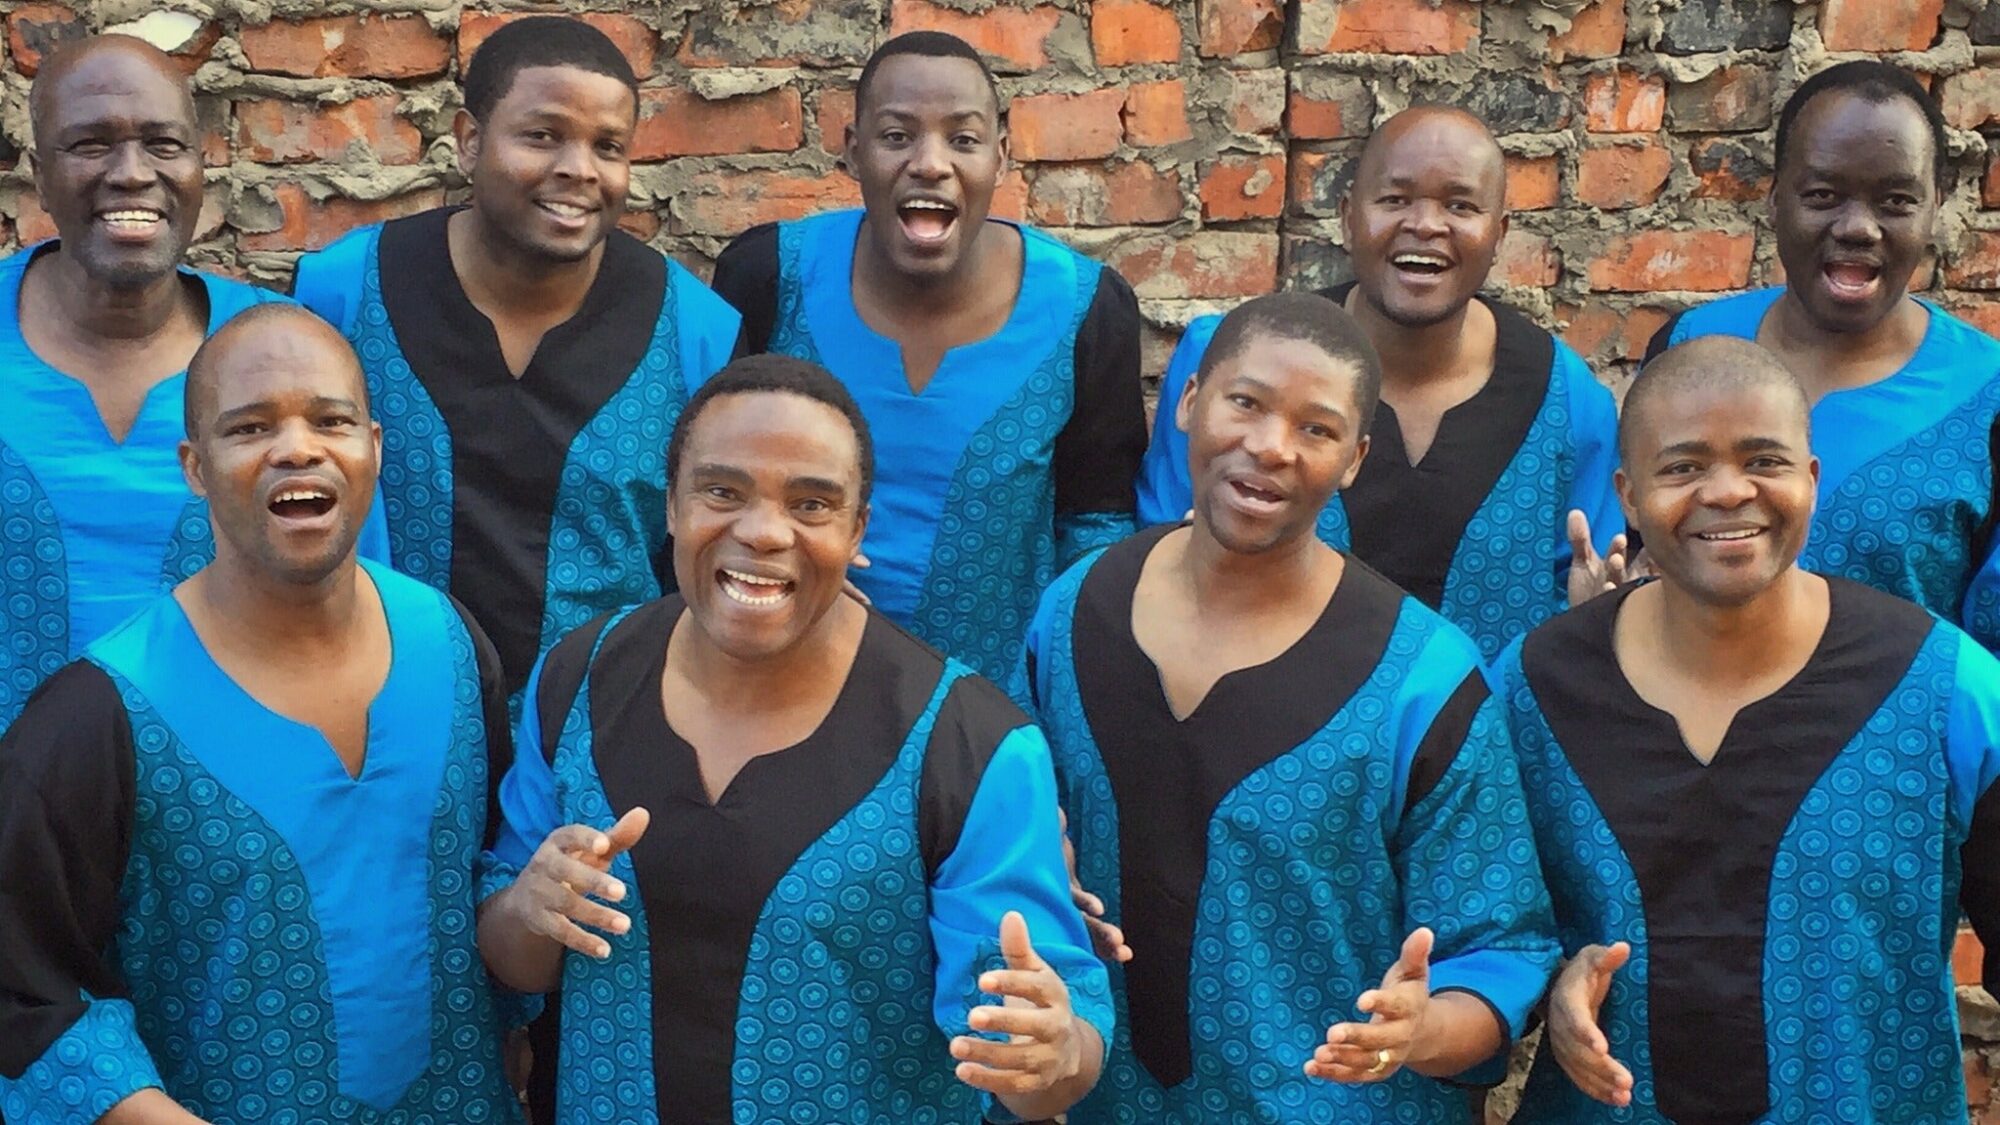 Image name Ladysmith Black Mambazo at Grand Opera House York York the 28 image from the post Events in Yorkshire.com.